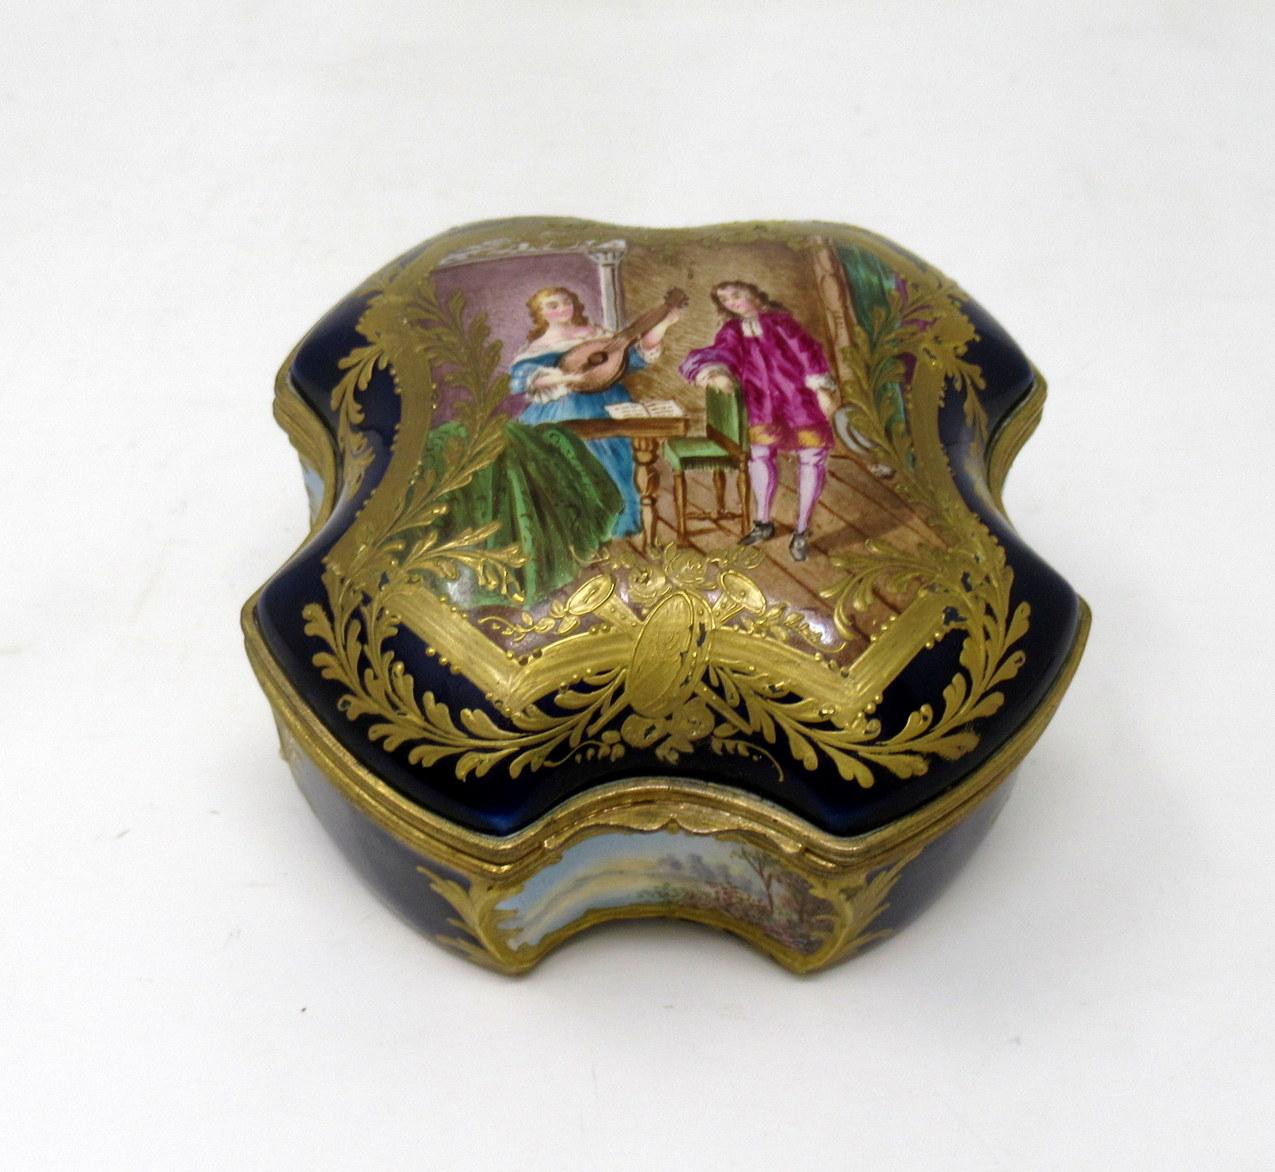 A very fine quality French hand decorated ladies jewelry casket or dresser box of outstanding Museum quality, and of square outline with all four inverted sides, mid-late 19th century, possibly by Samson Paris after Sèvres.

The dome hinged lid